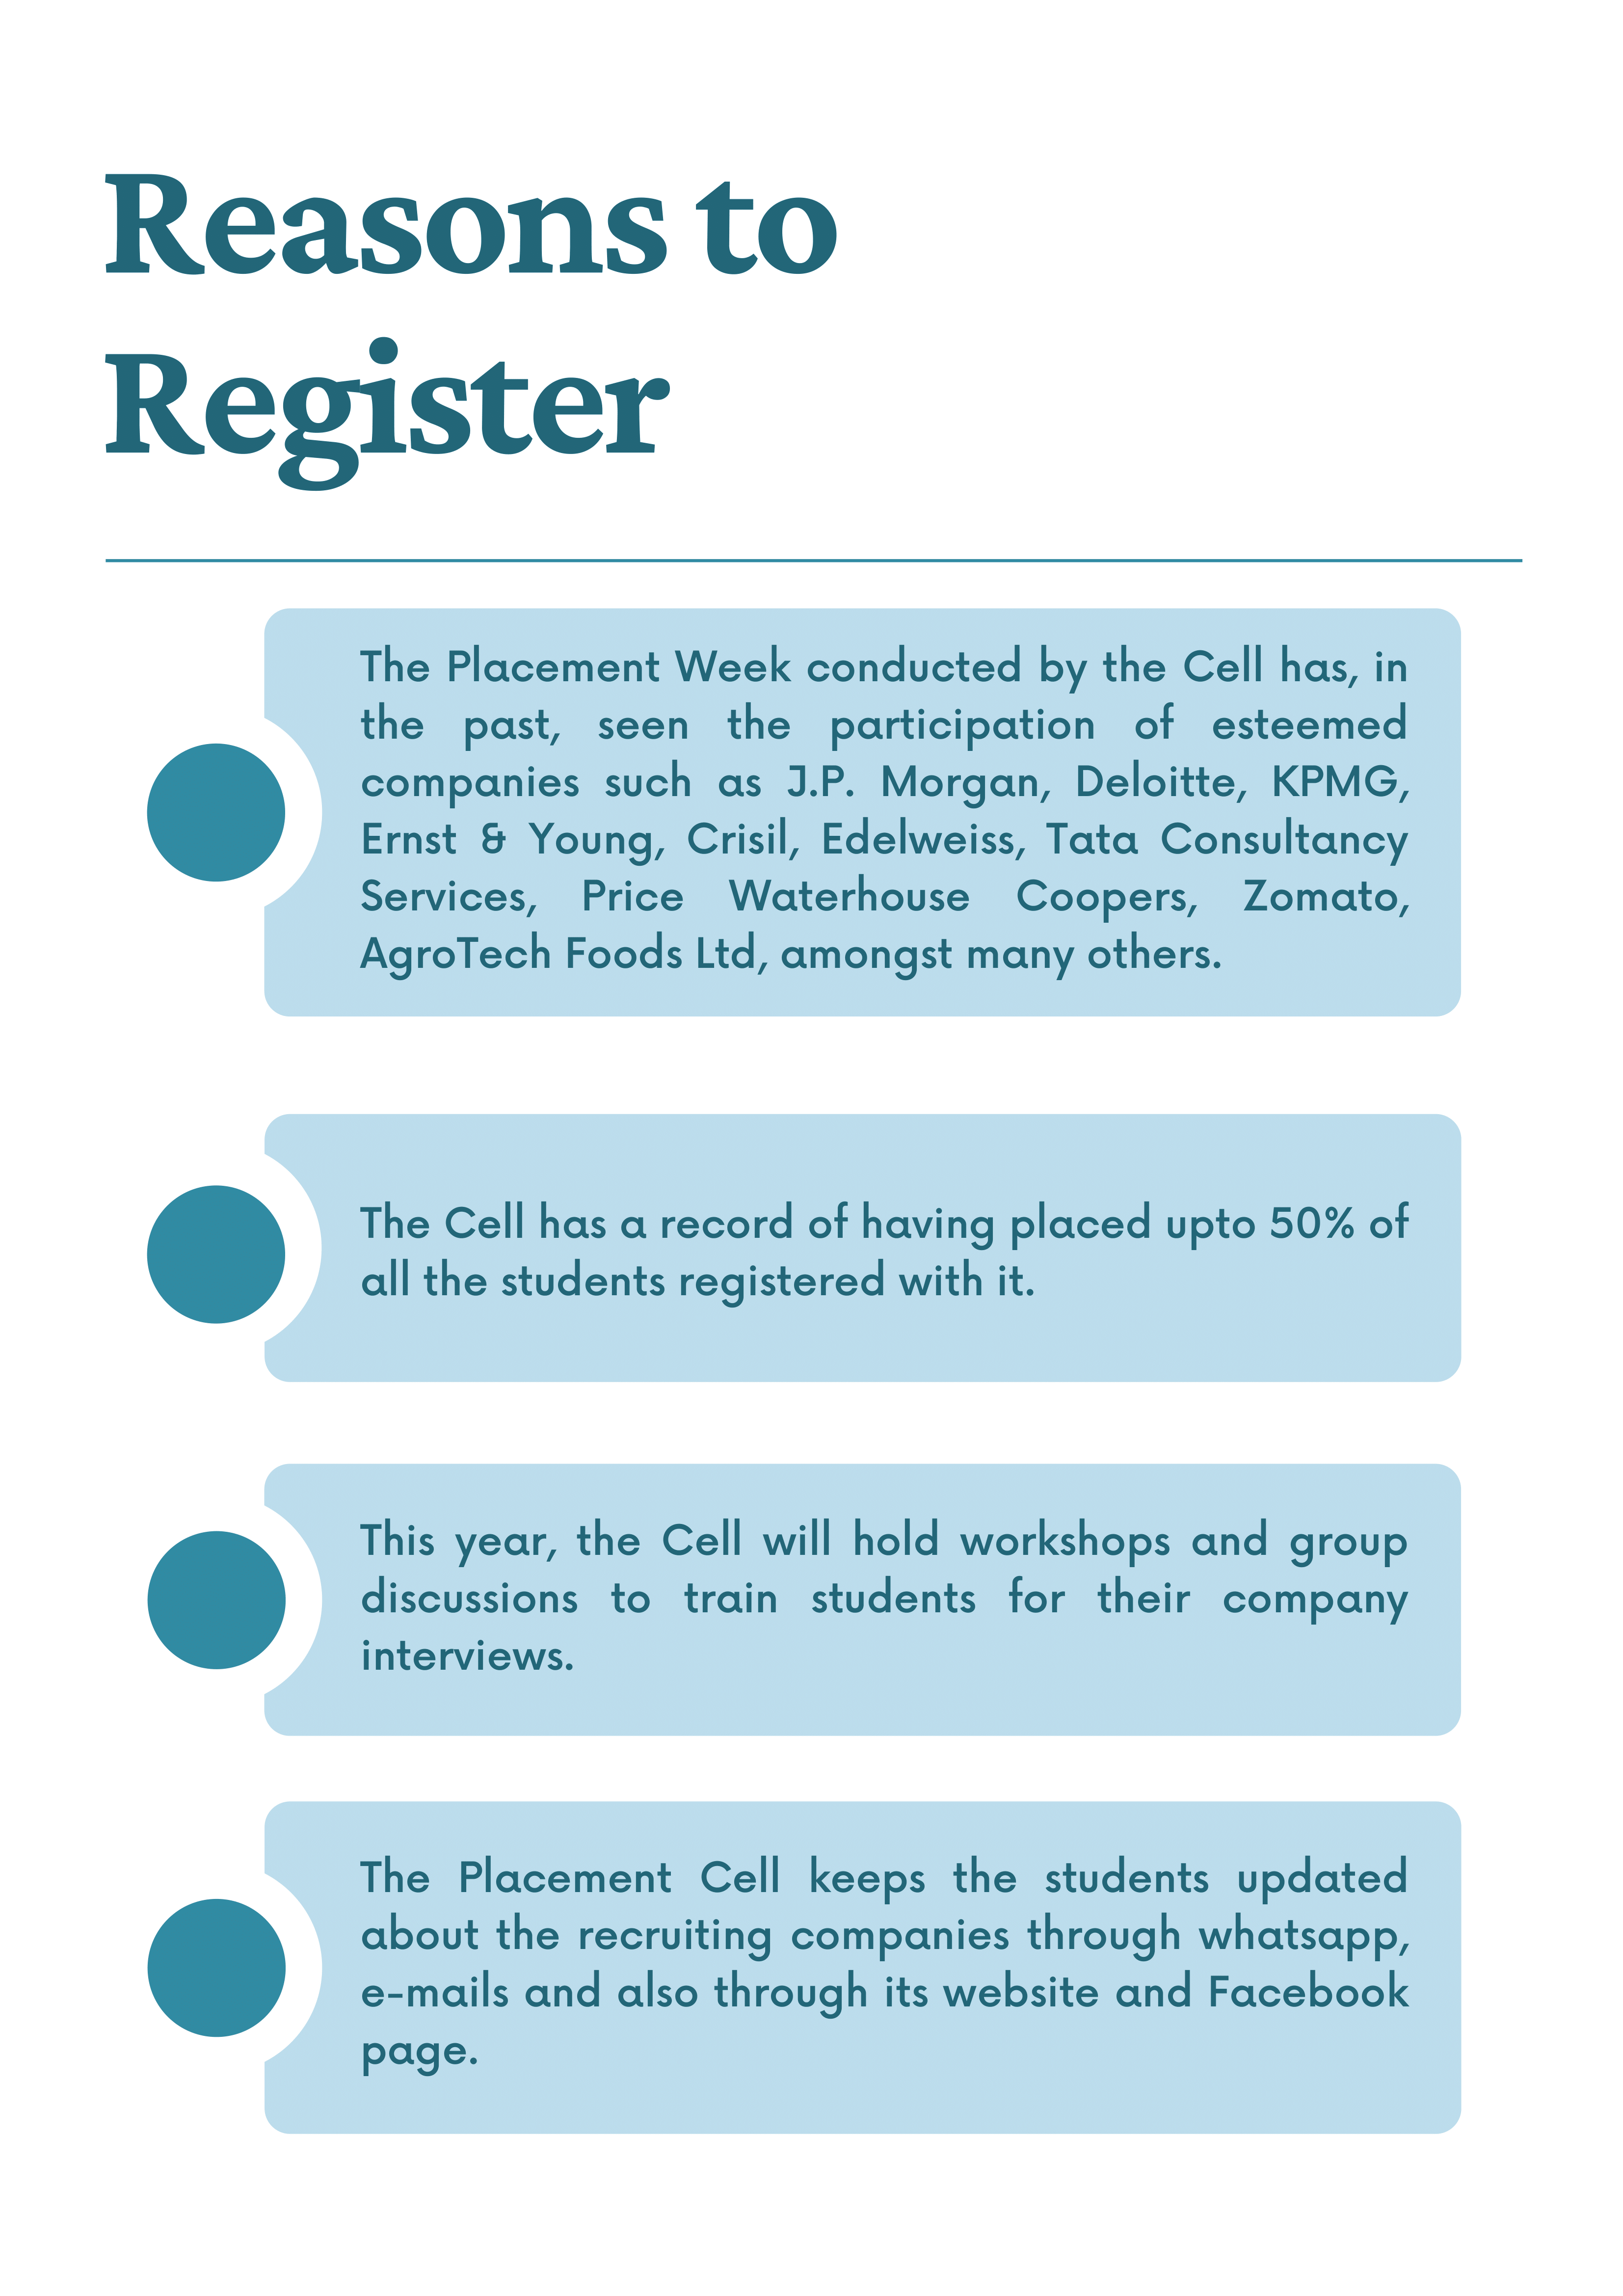 Reasons to Register